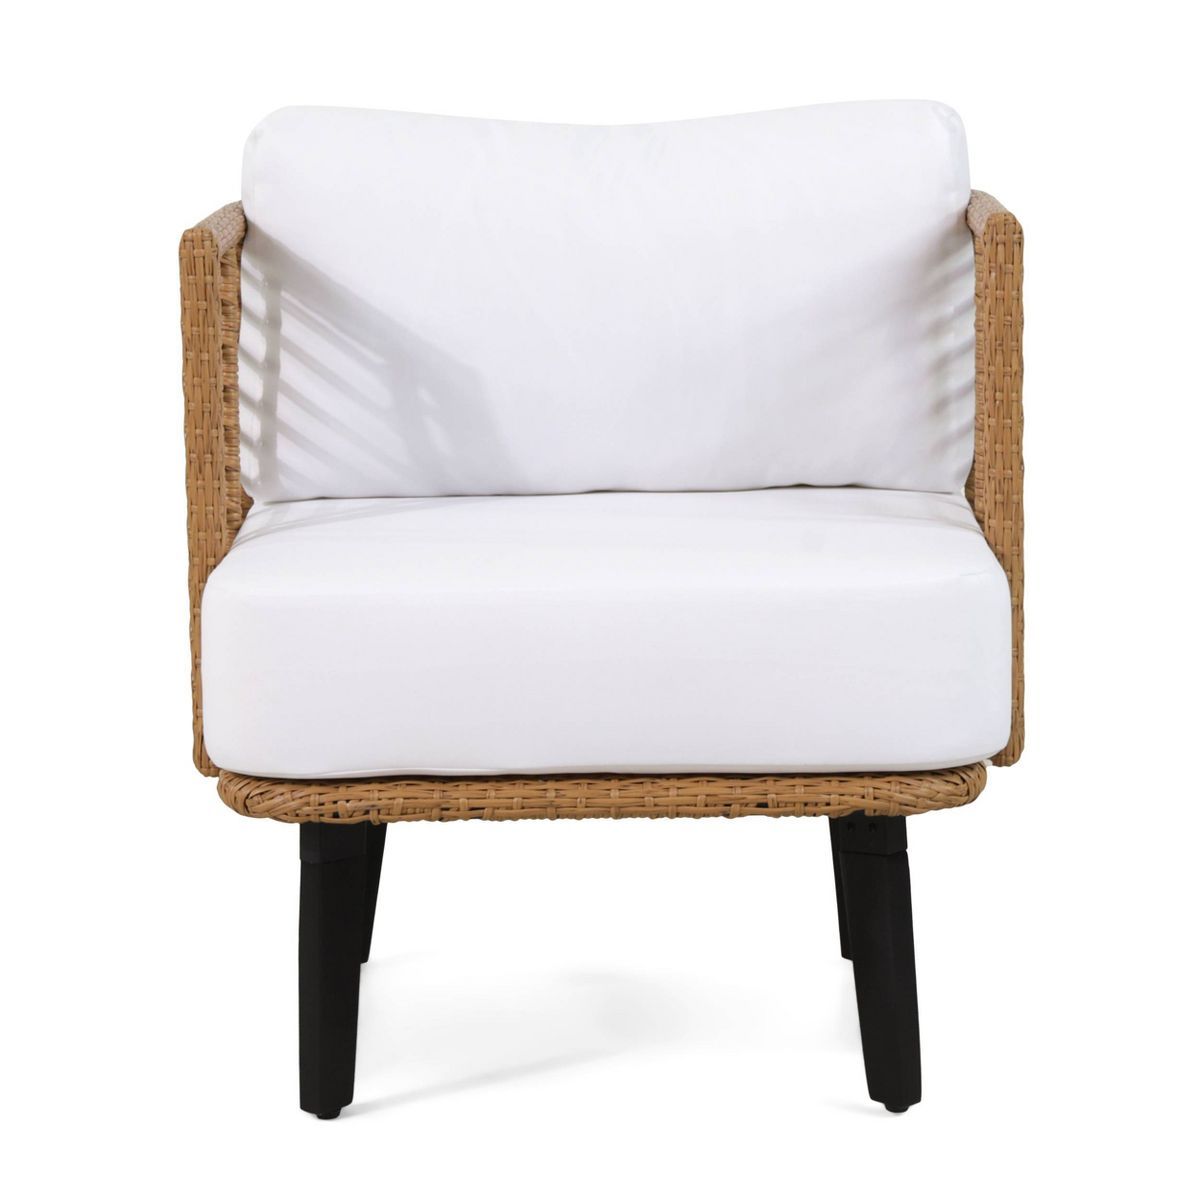 Nic Outdoor Wicker Club Chair with Cushion - Light Brown/White - Christopher Knight Home | Target